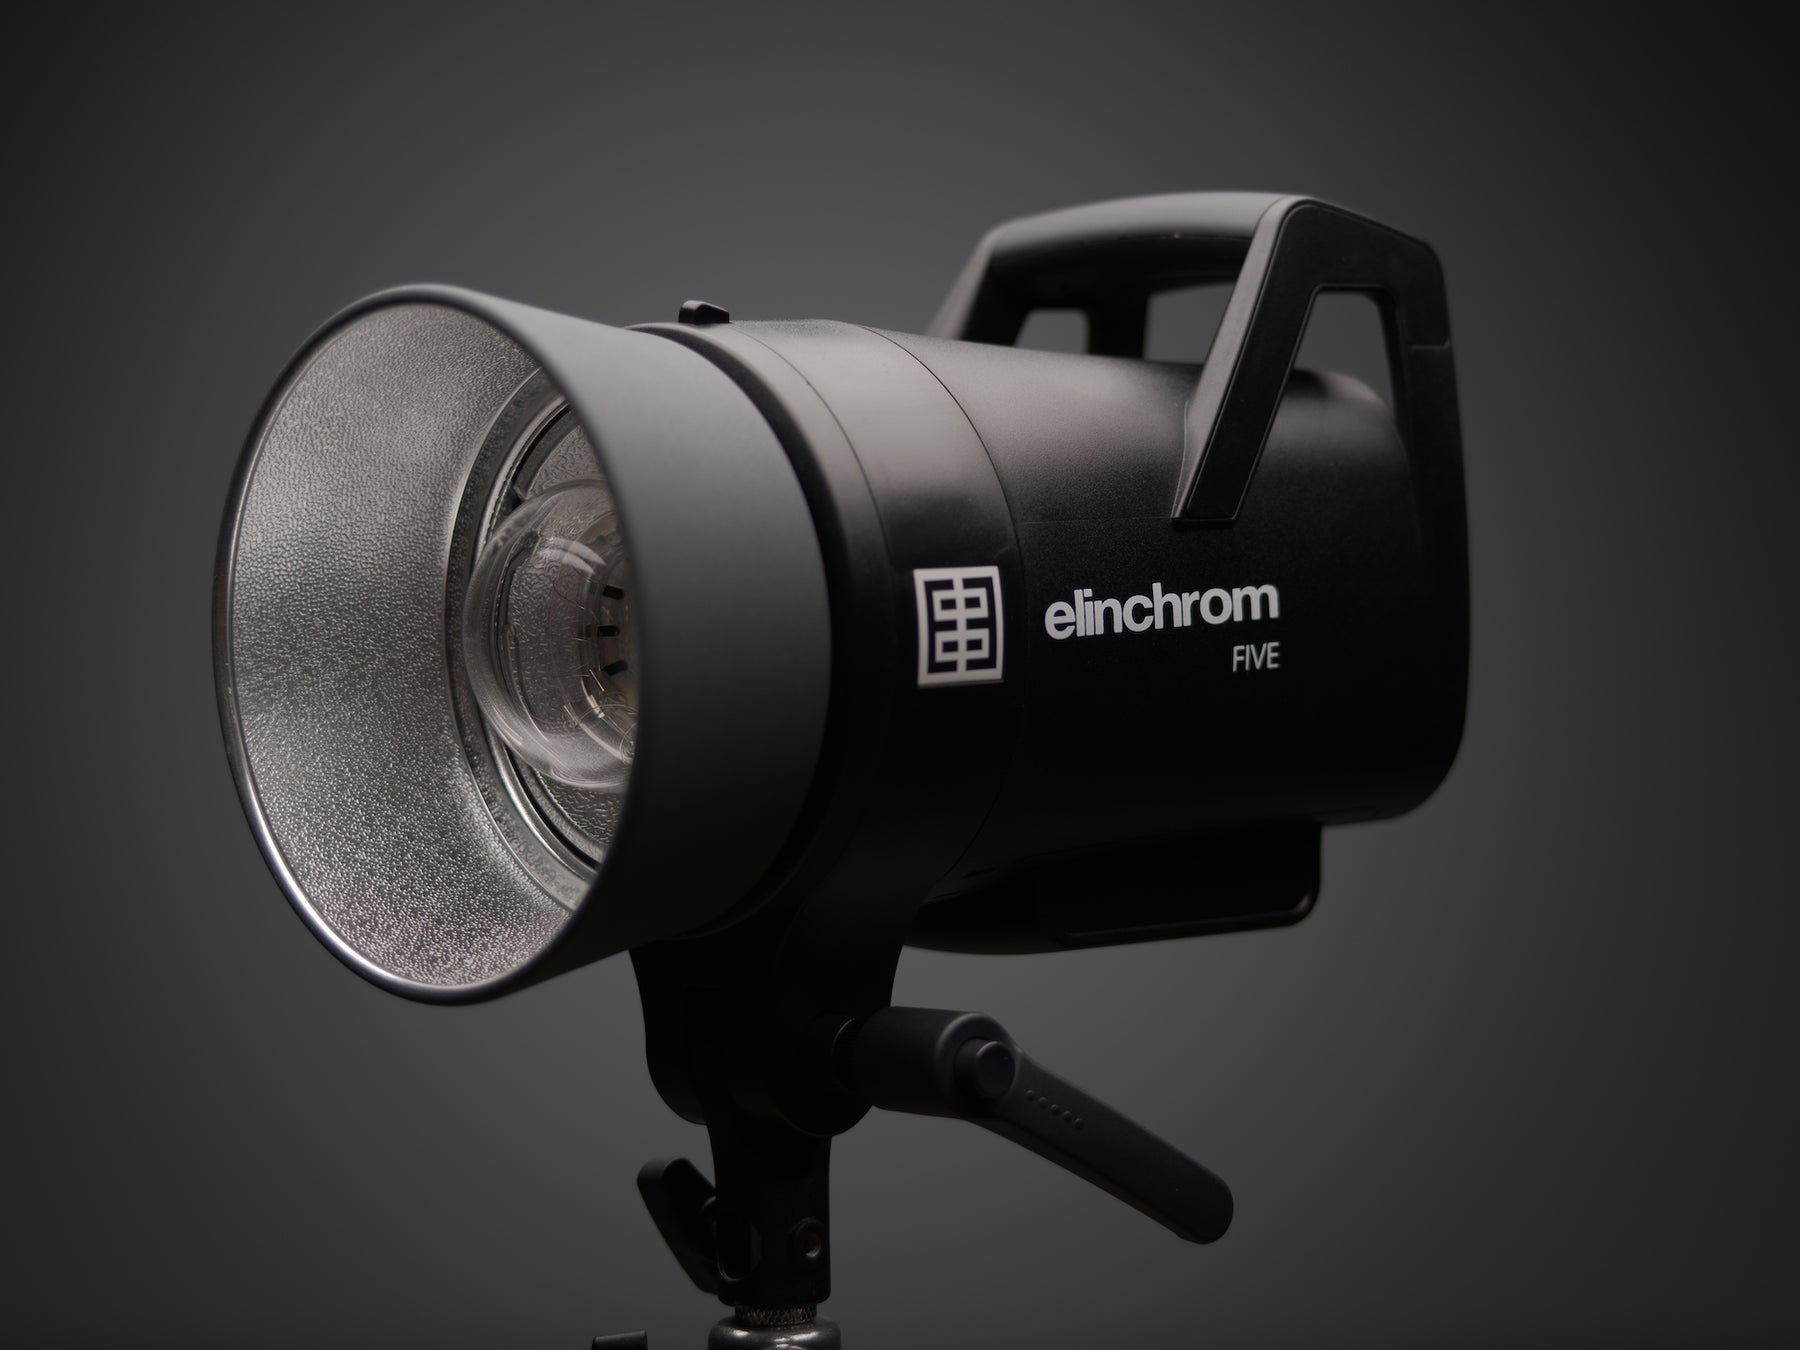 Elinchrom FIVE Review Part 1 - First Impressions